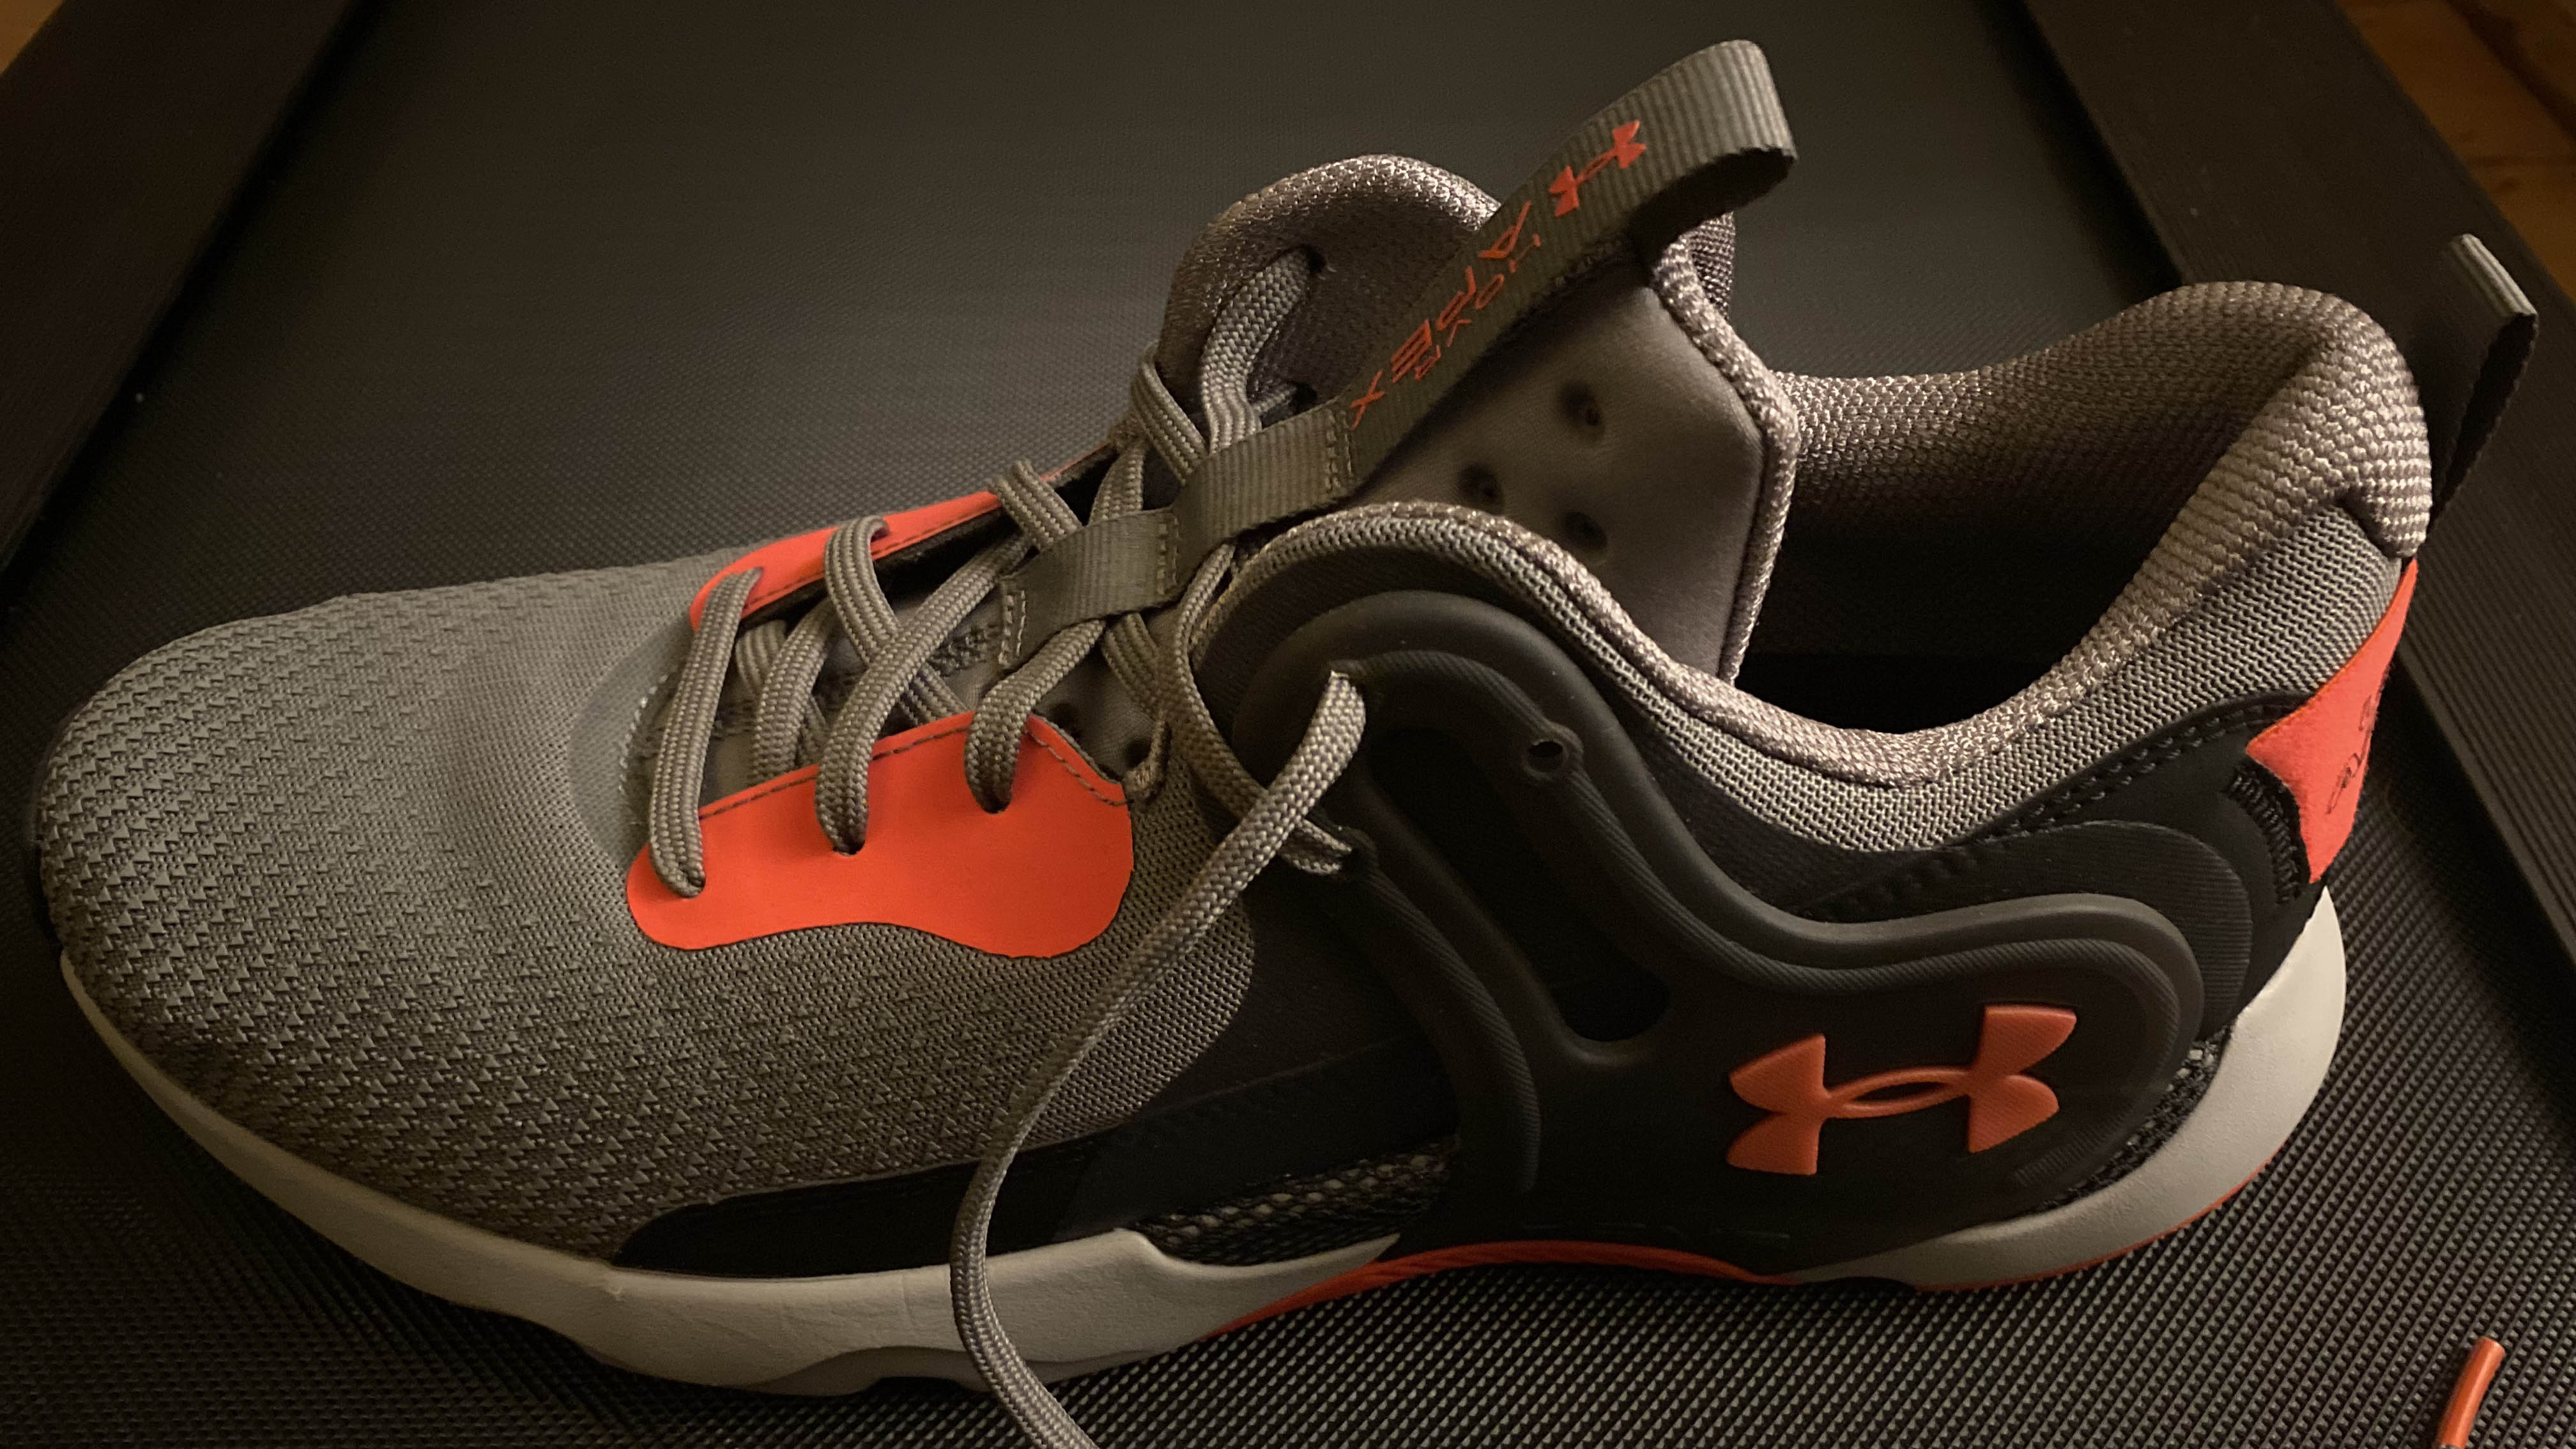 Under Armour Hovr Apex review: cross-training shoes built for the gym | T3